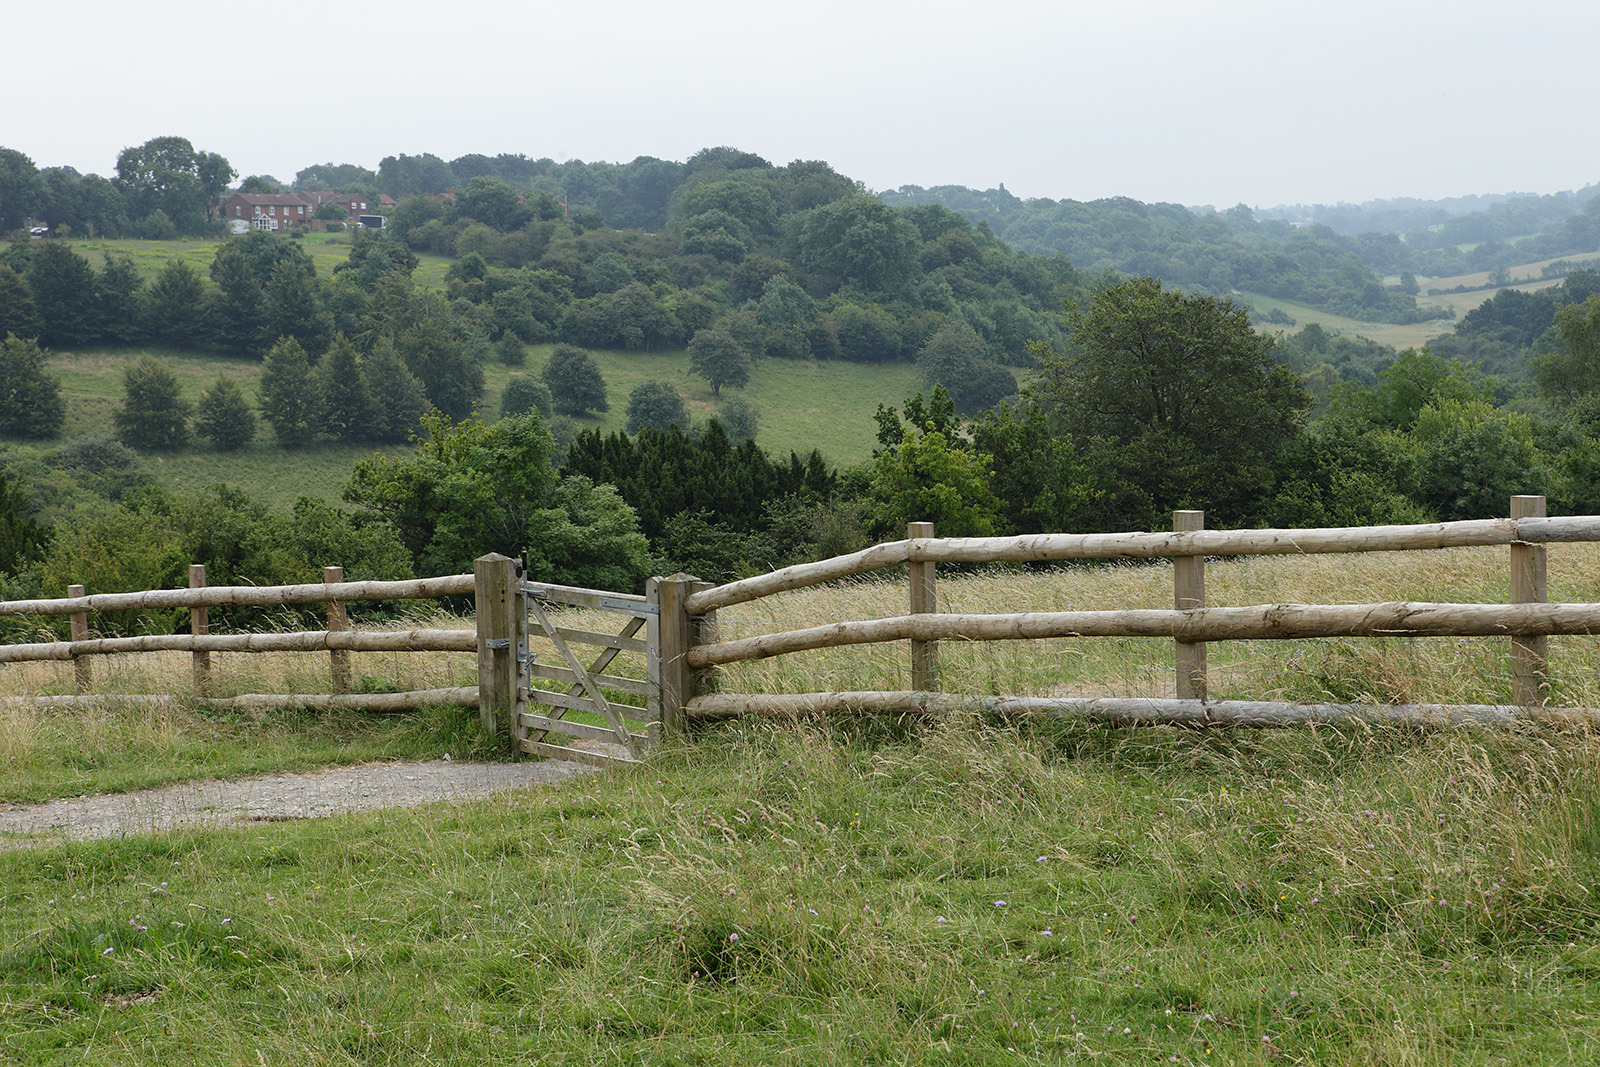 20160720_Croydon_Farthing-Downs_Fence-gate-and-hazy-view